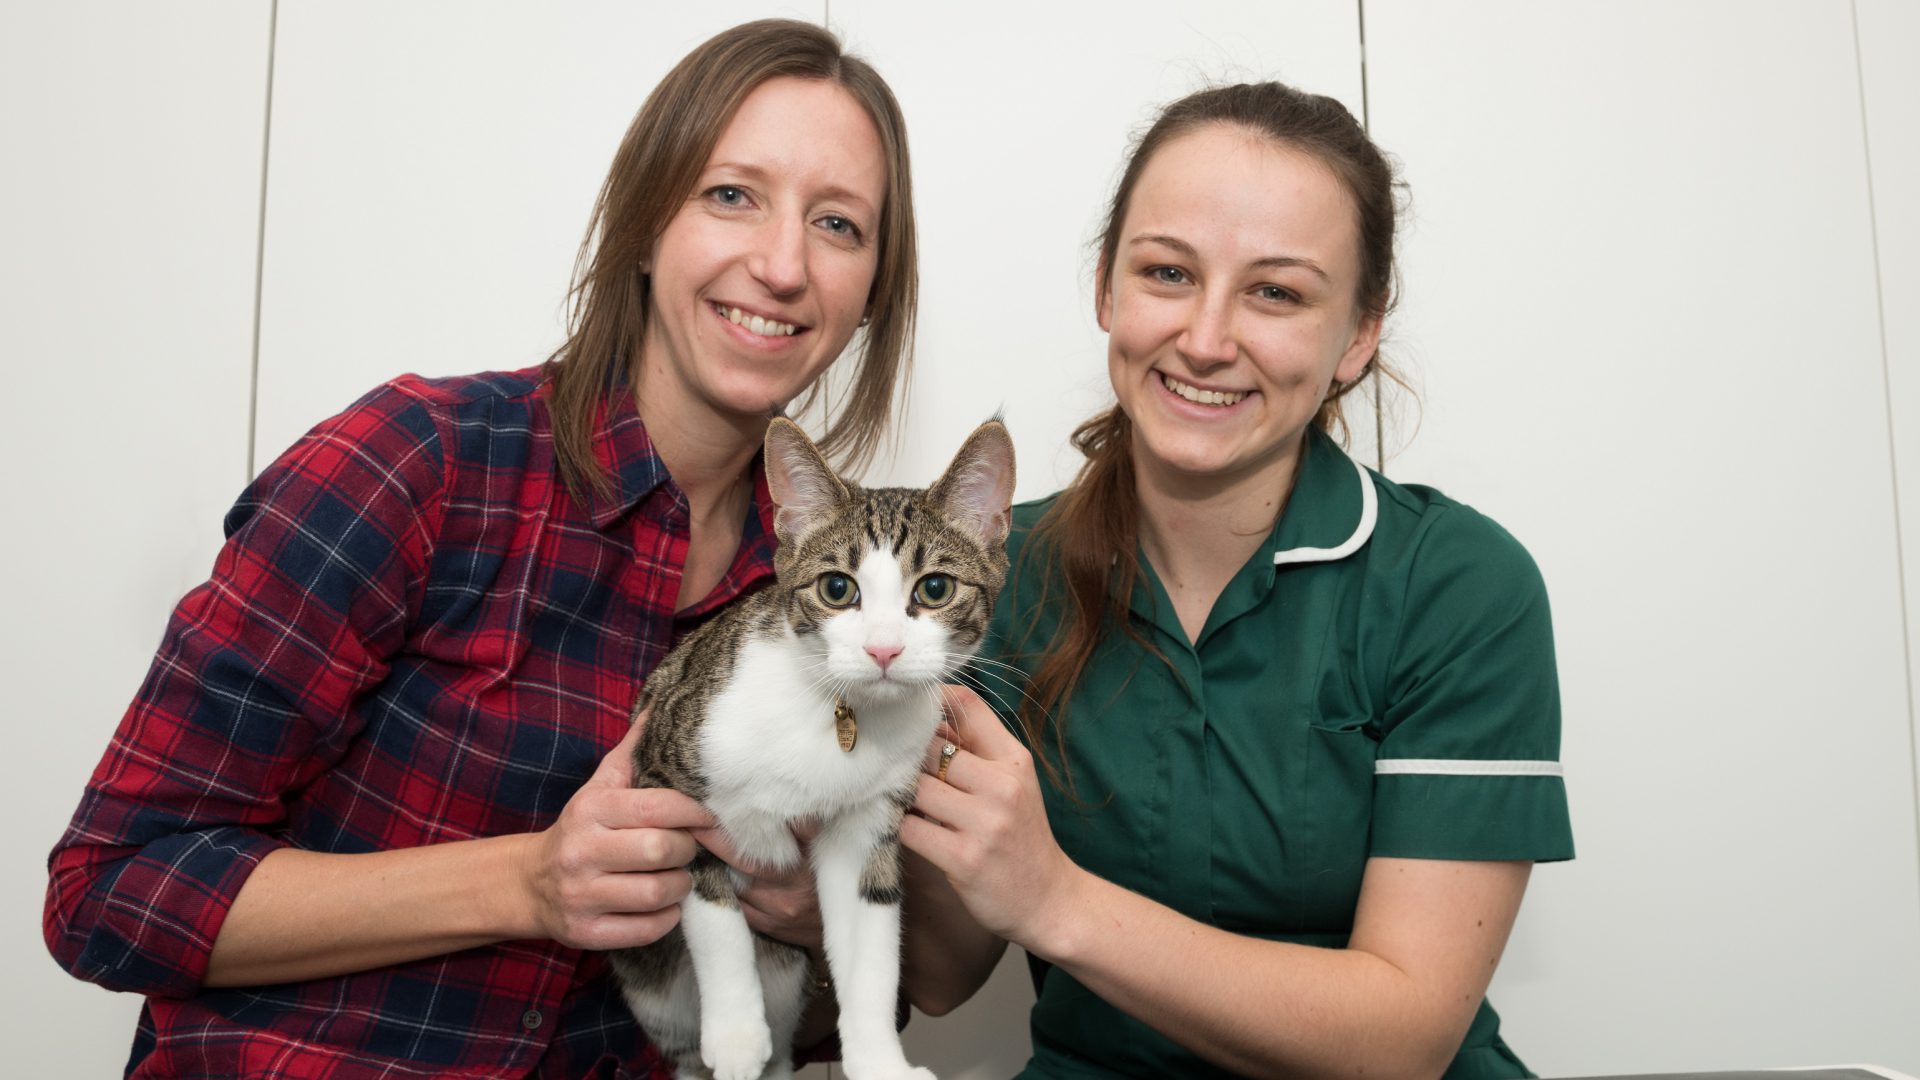 Kitten saved by vets after eating chocolate meant for Christmas